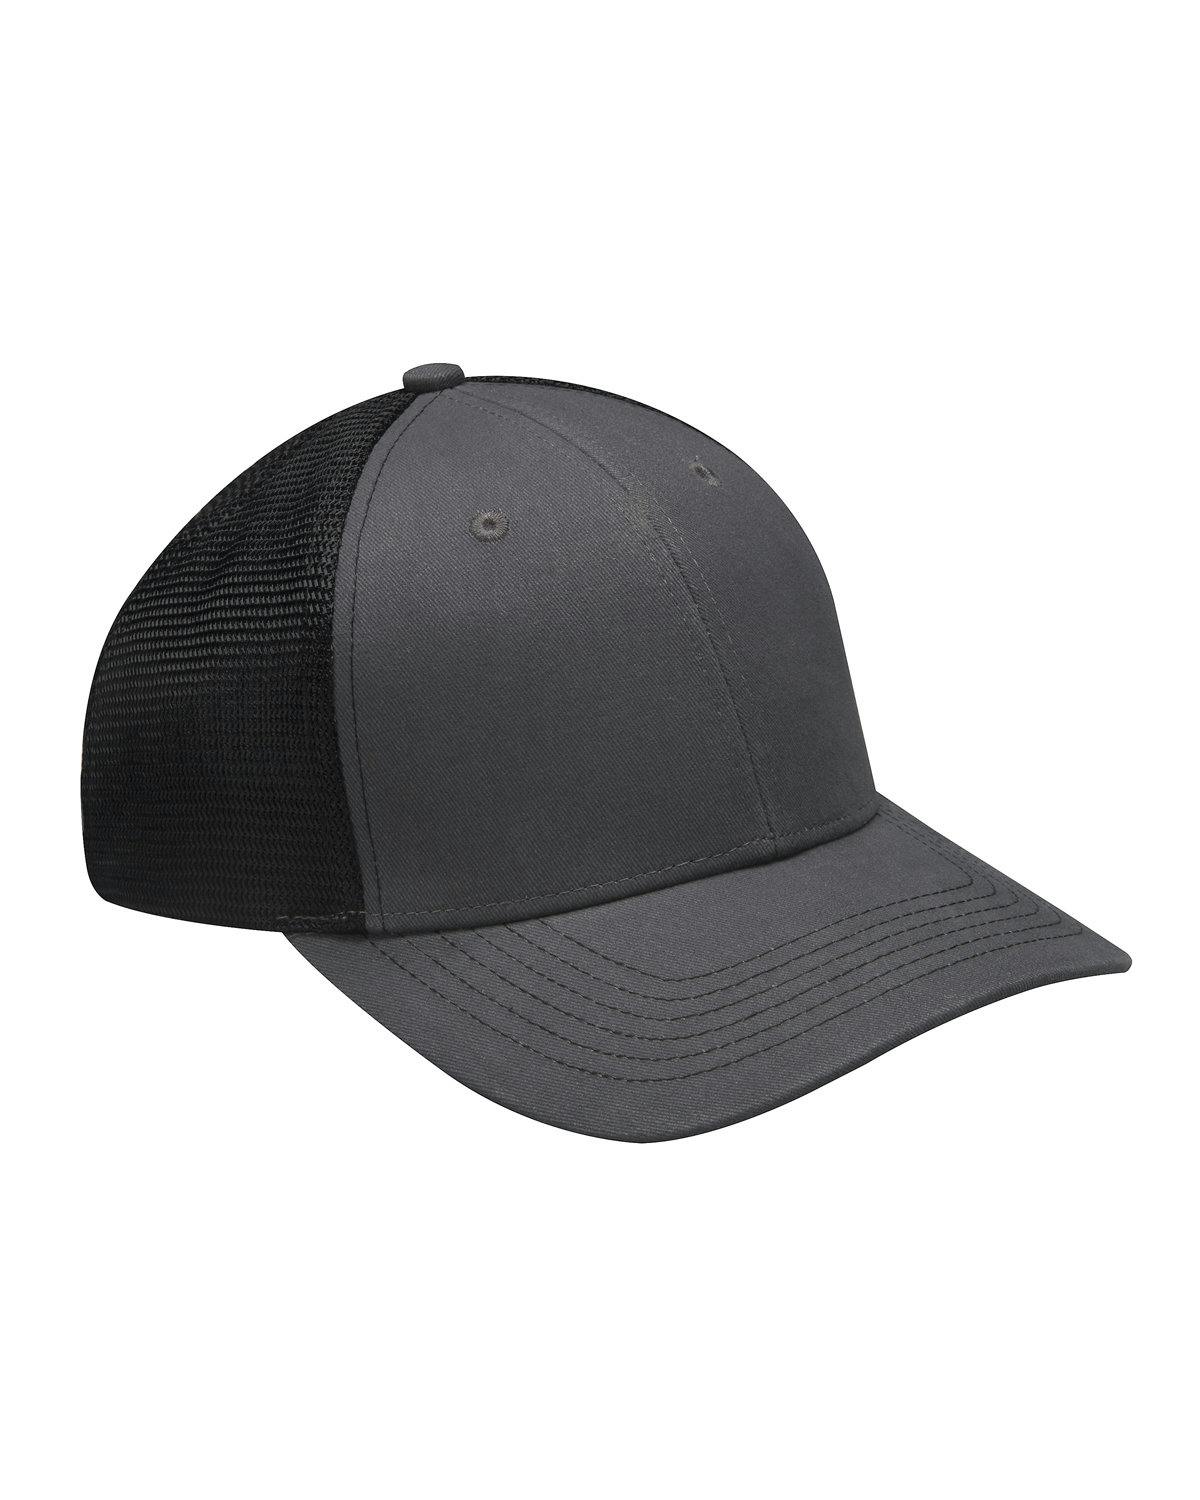 Image for Brushed Cotton/Soft Mesh Trucker Style Cap